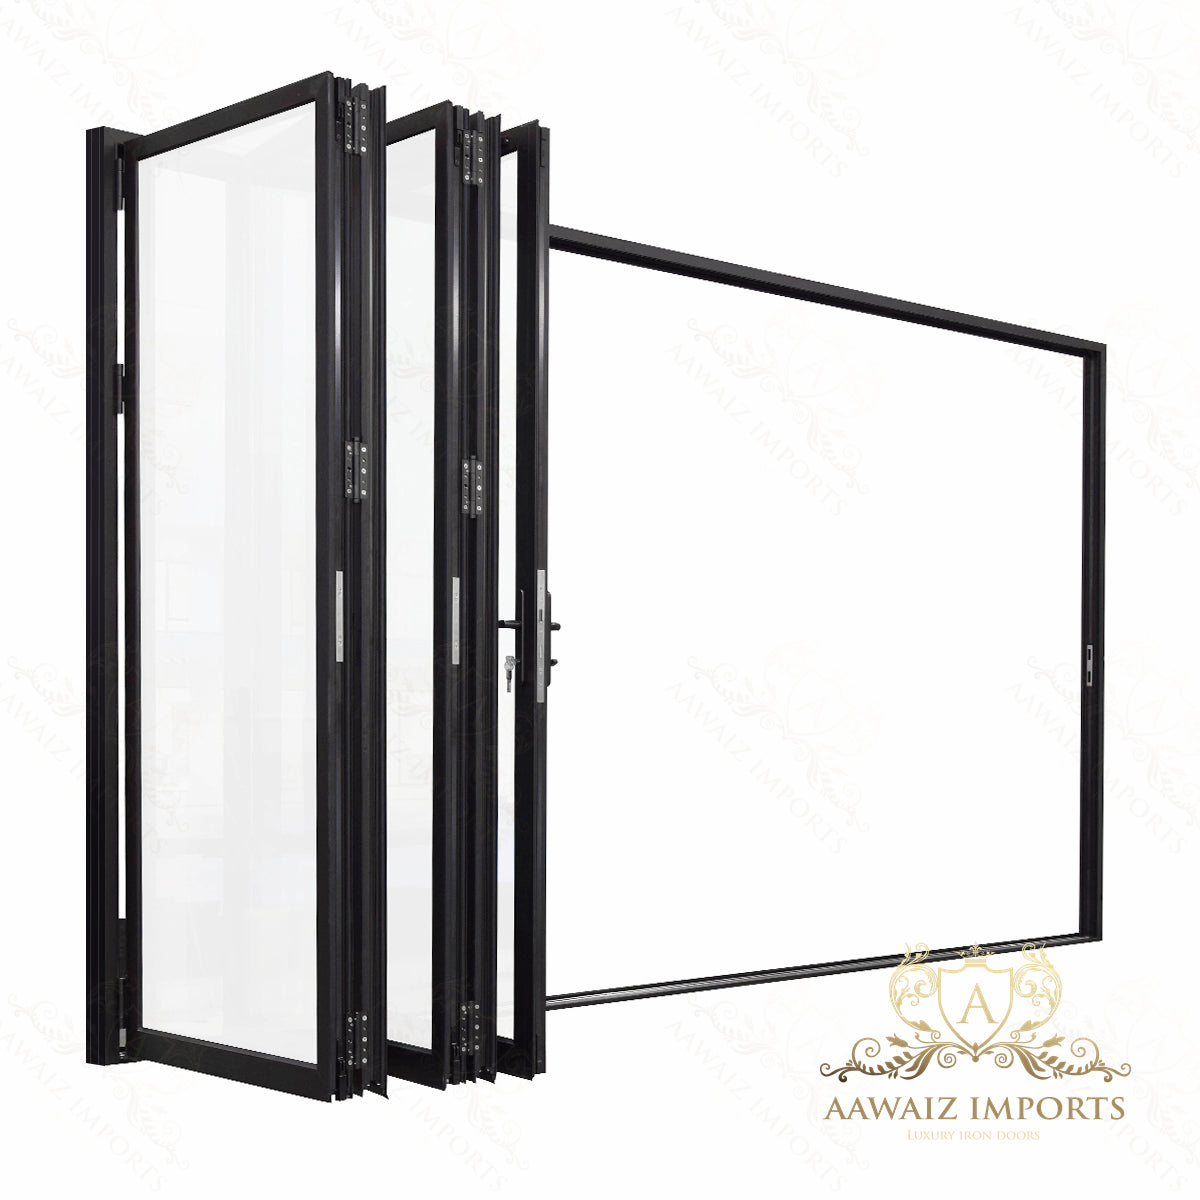 12 Ft Wide By 9 Ft Tall (144" By 108") Aluminum Bi Fold Patio Door  Outswing  Thermal Break Insulated Matt Black Finish